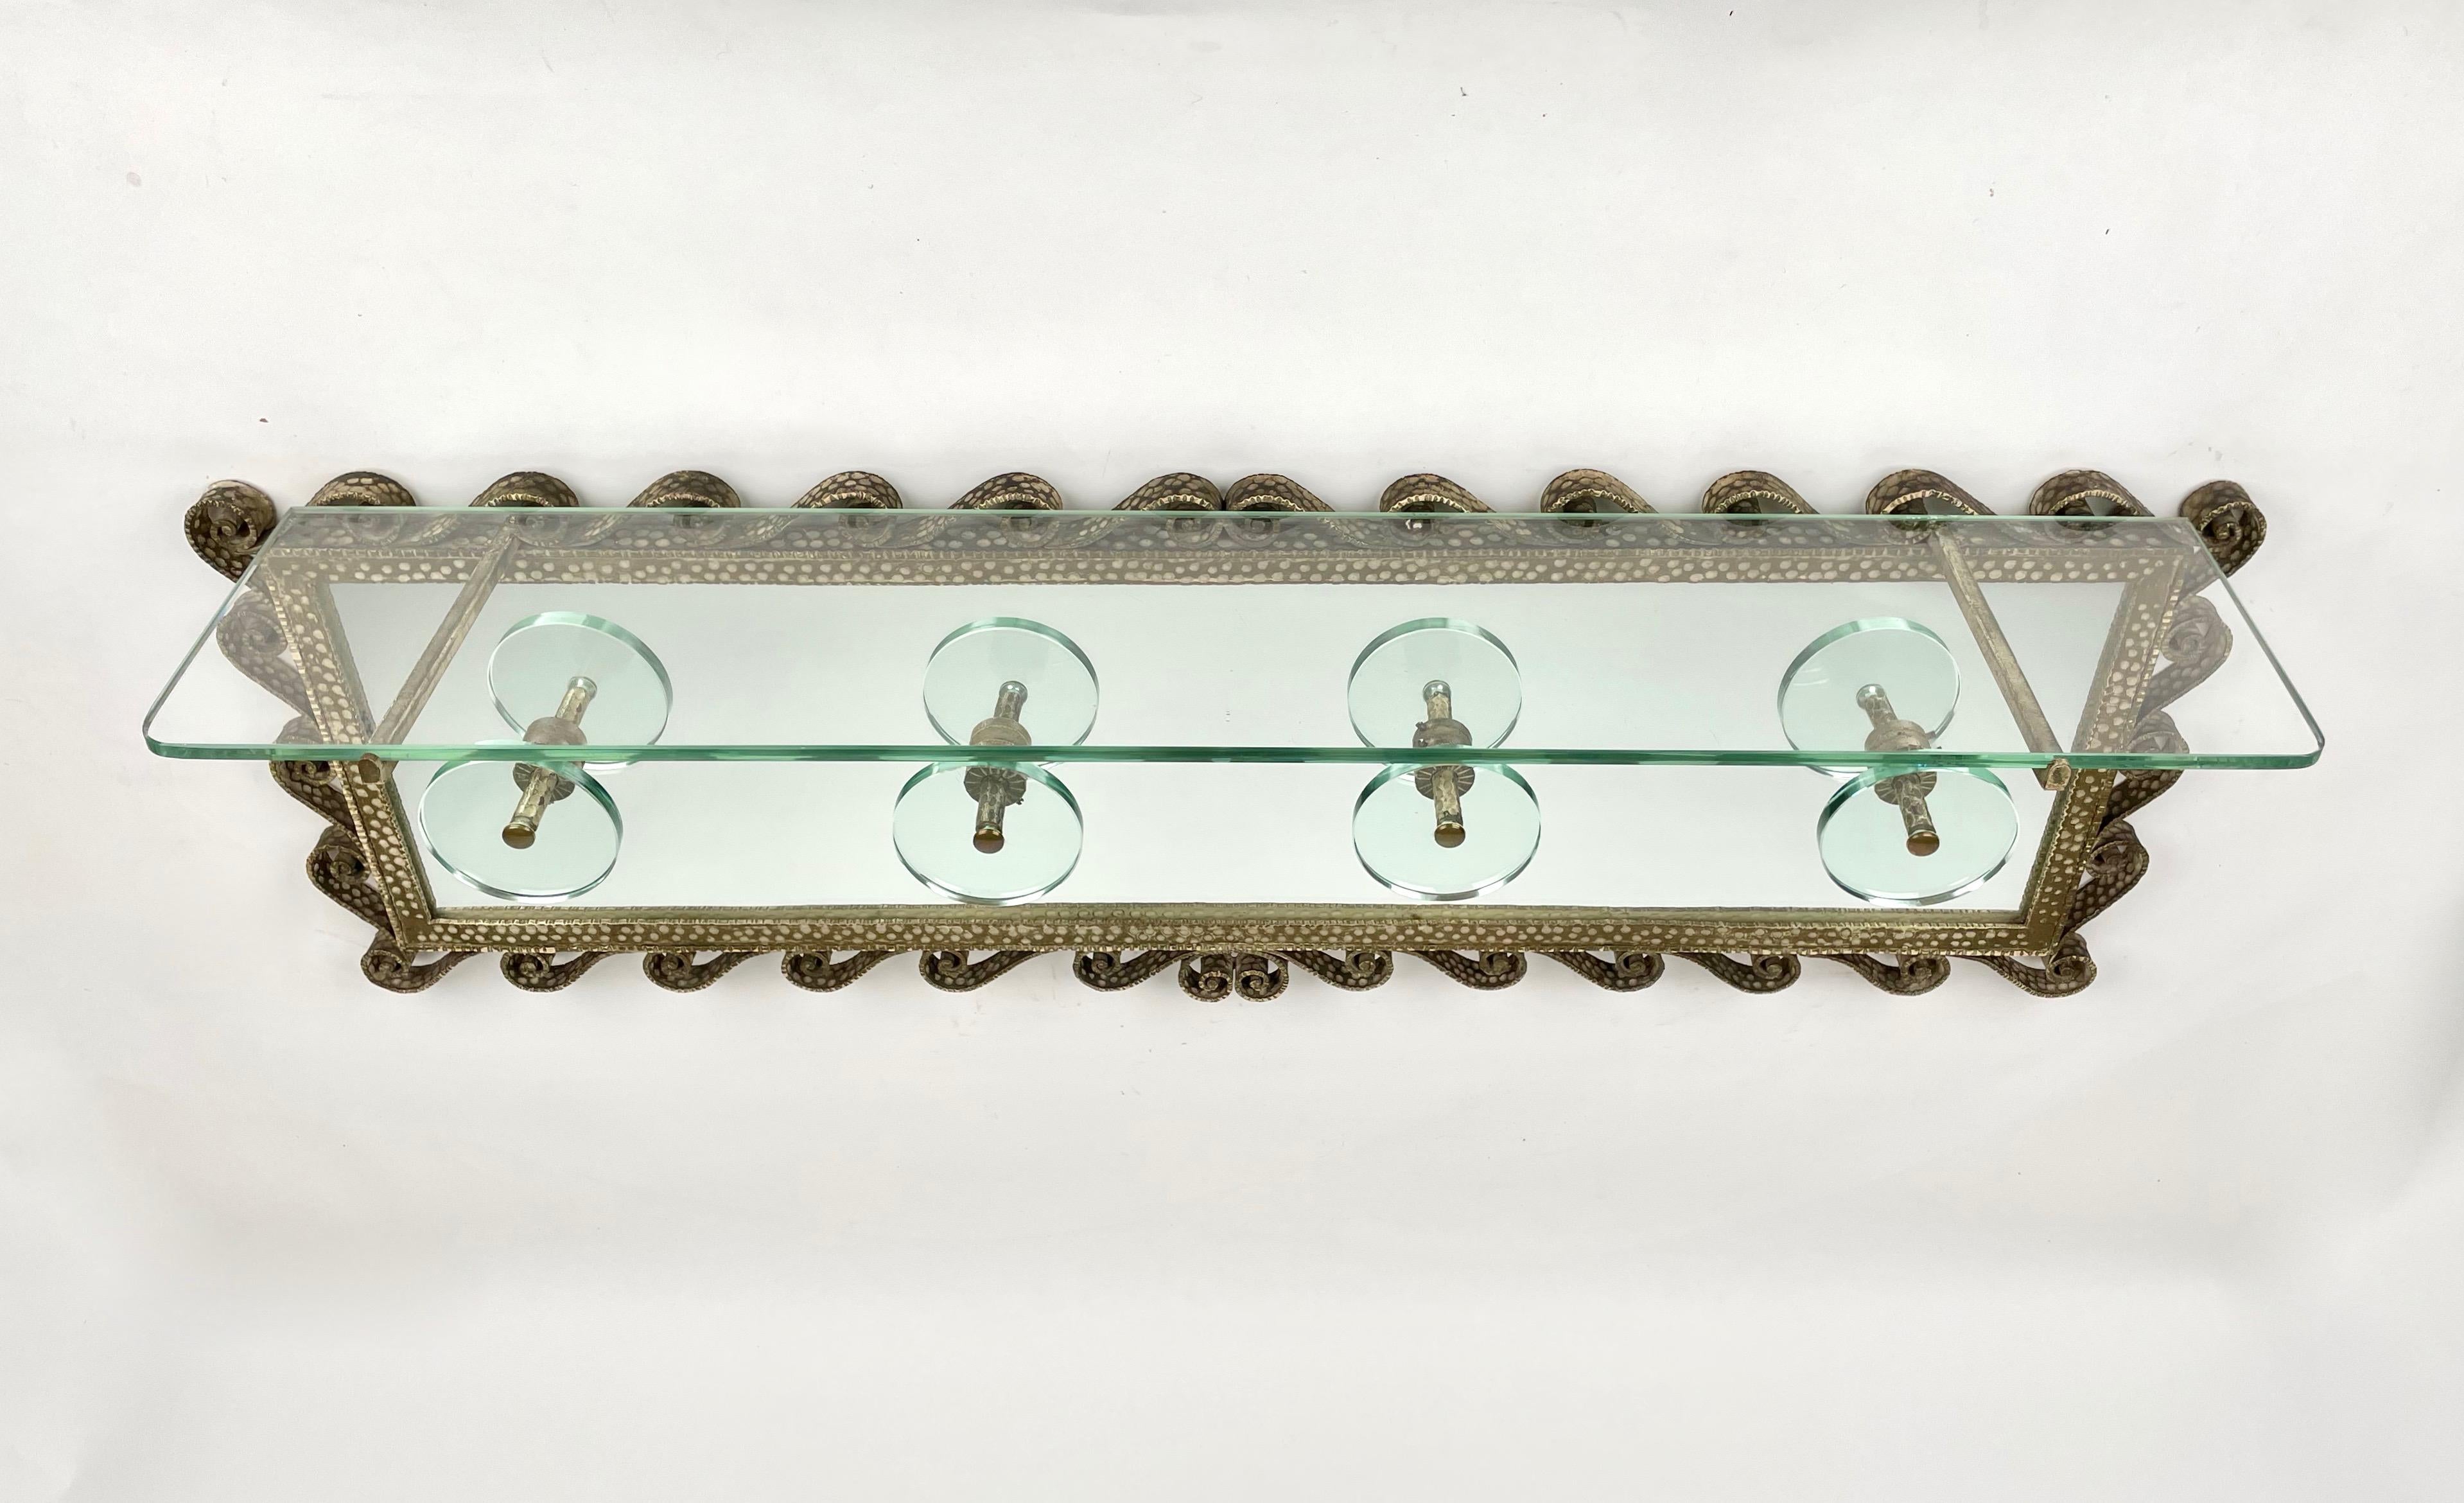 Coat rack in mirror and glass featuring a beautiful iron frame with curlicues and four circular glass hooks by the Italian designer Pier Luigi Colli for Cristal Art. Made in Italy in the 1950s.